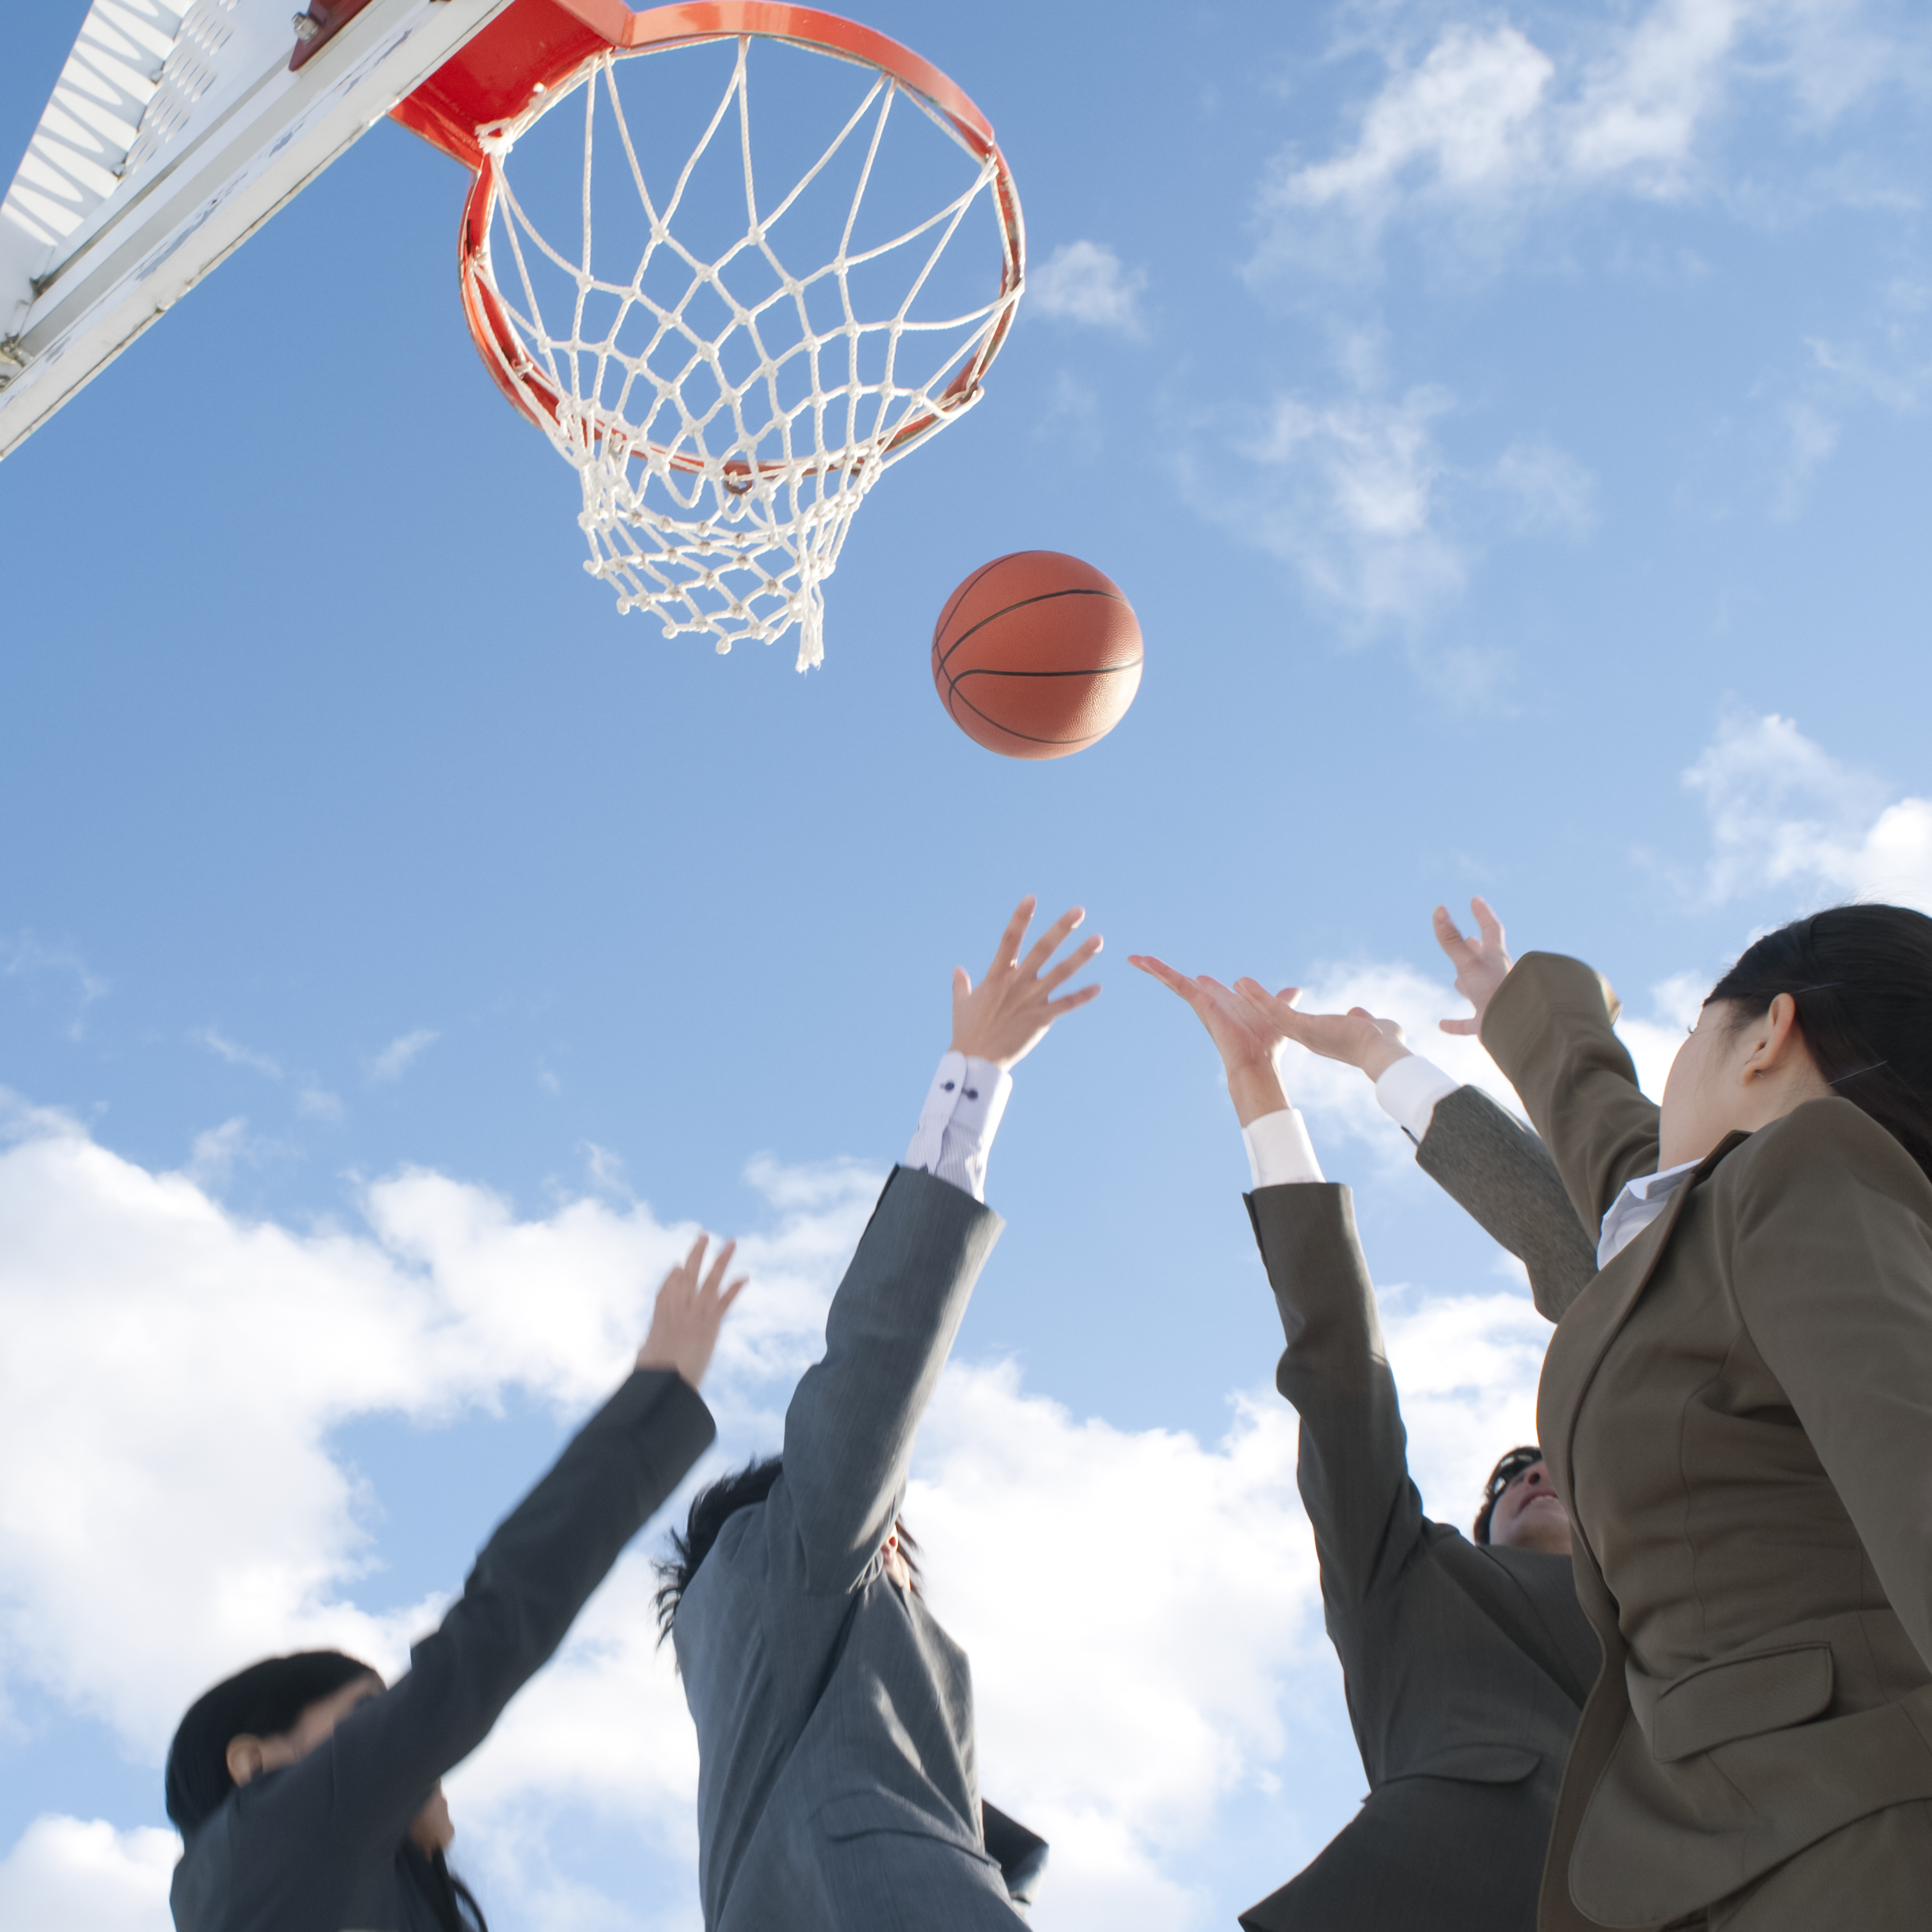 Photo of people in business suits reaching up toward a basketball that is in the air near a basketball hoop.